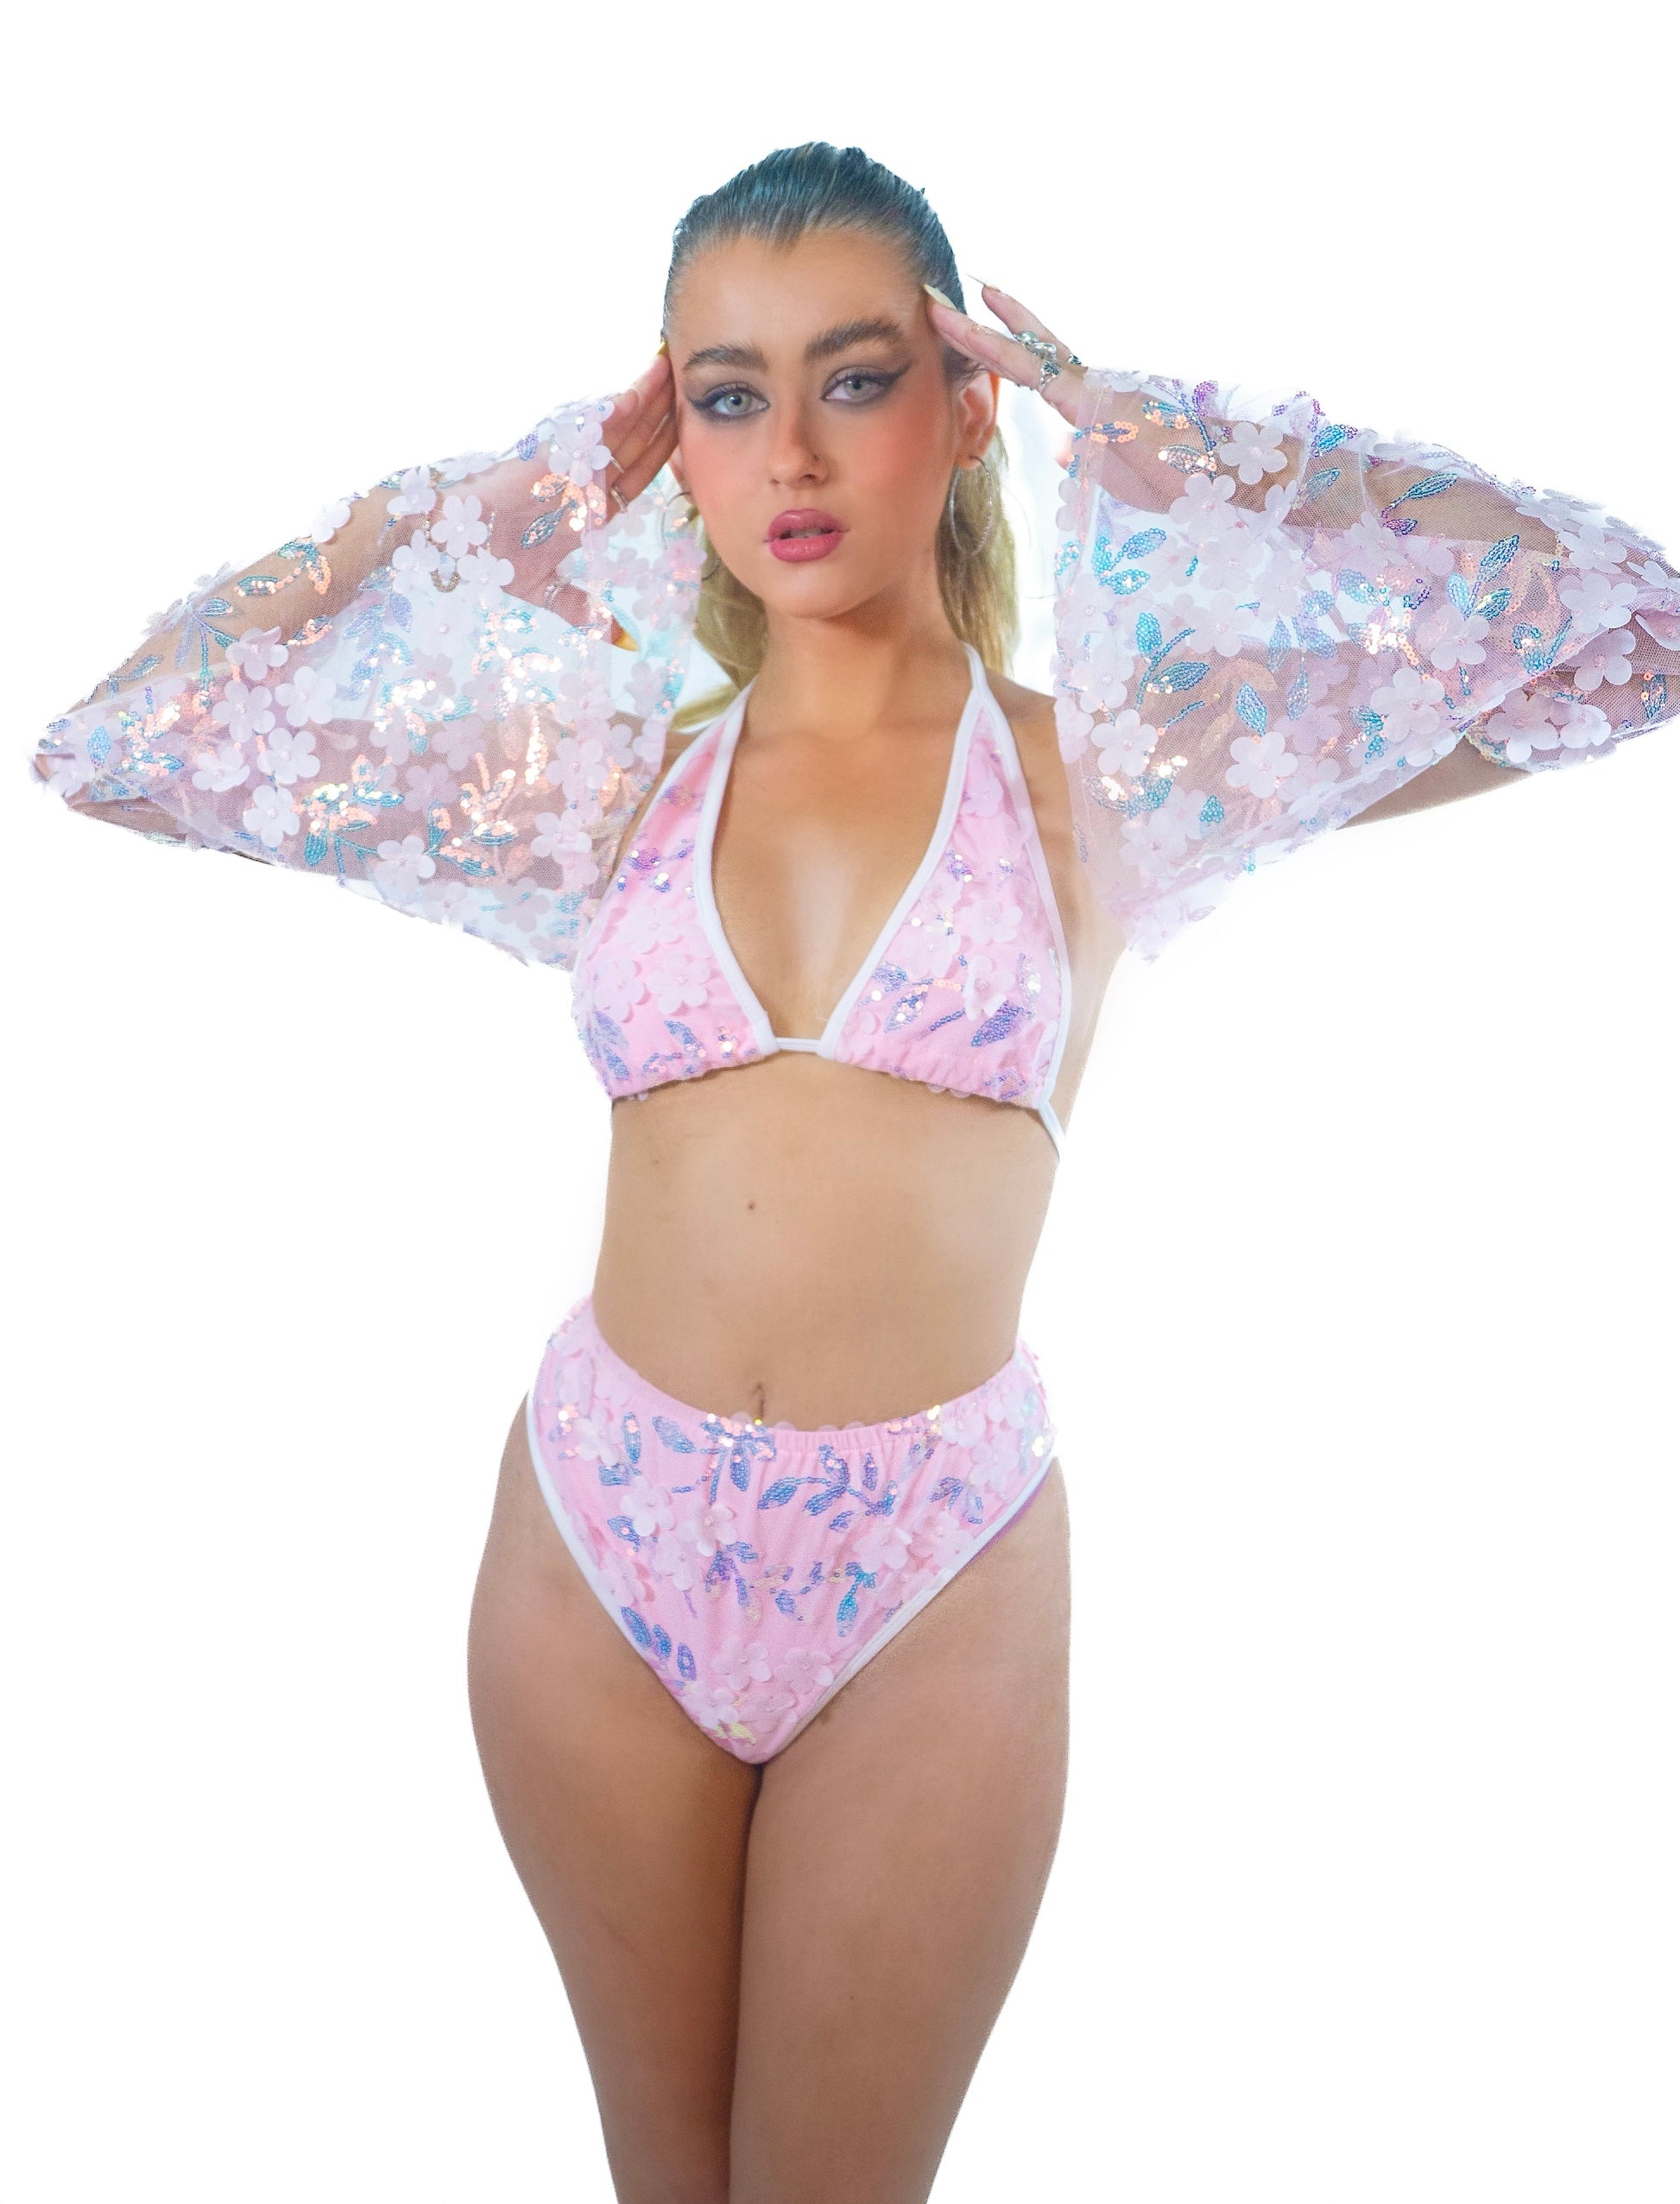 Pink Cloud Fairy Blossom Top Rave clothes,rave outfits,edc – THE LUMI SHOP